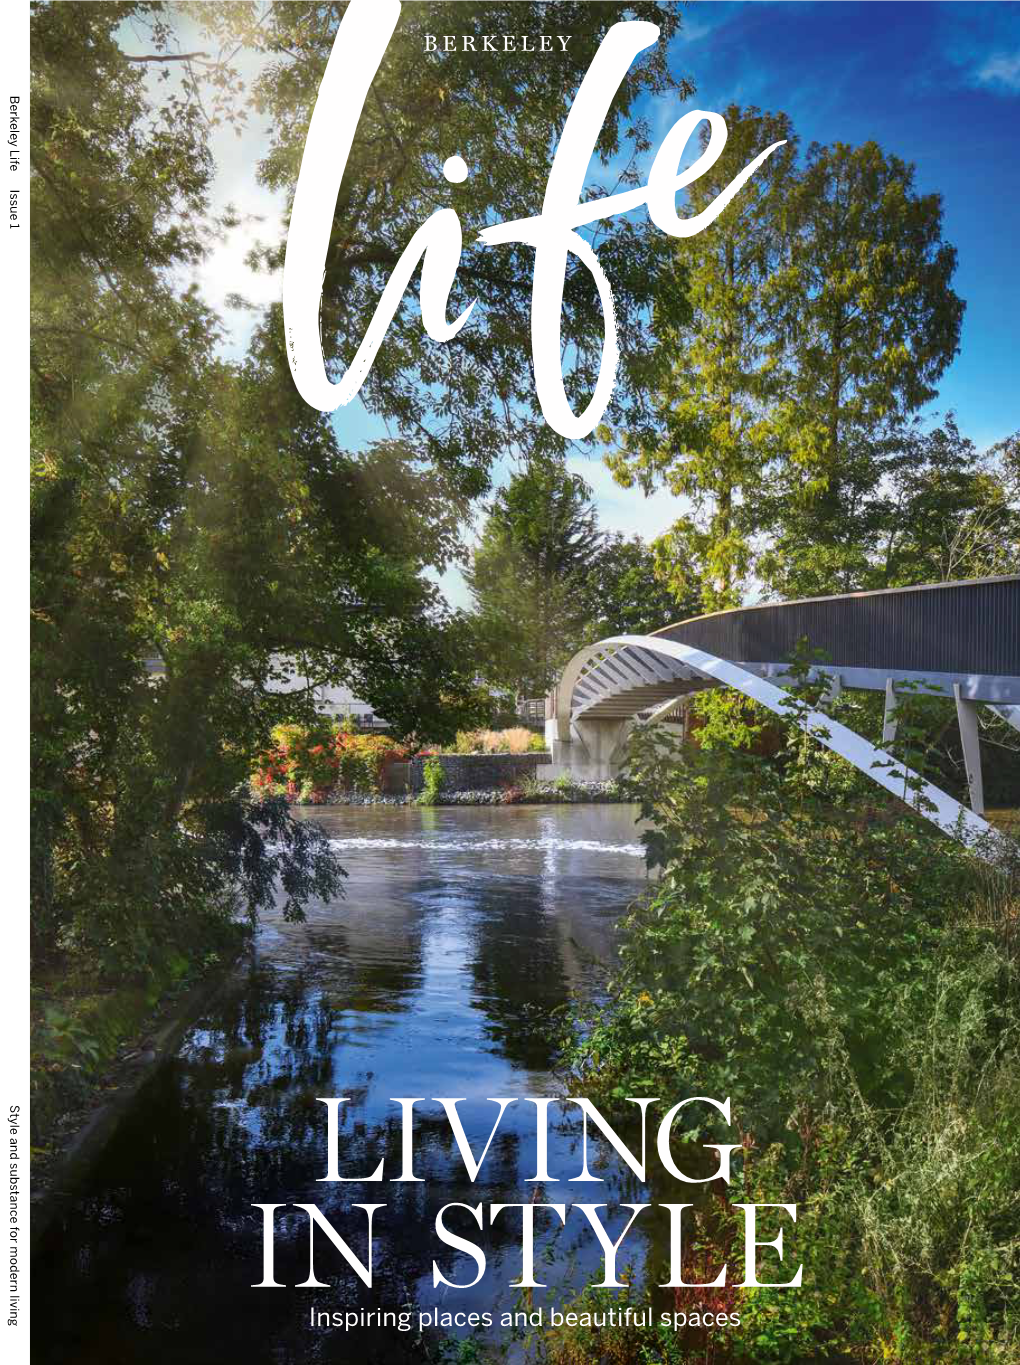 Berkeley Life Issue 1 Style and Substance for Modern Living for ALL YOUR ASTON MARTIN REQUIREMENTS NEW, PRE-OWNED, SERVICING, PARTS and ACCESSORIES